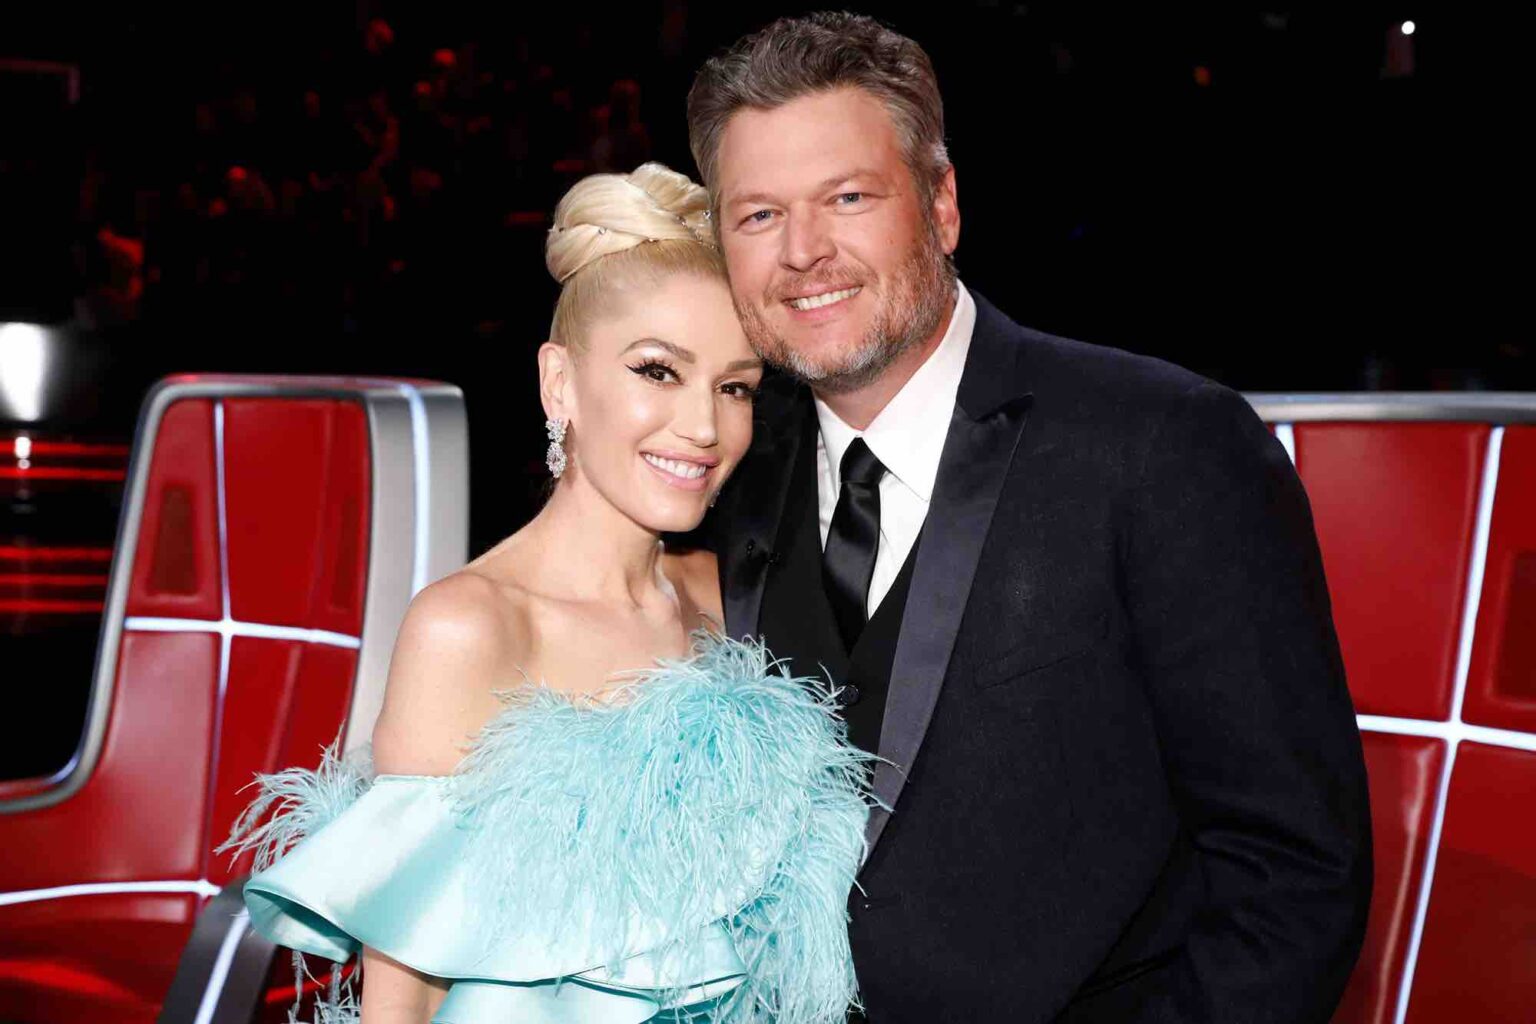 Gwen Stefani and Black Shelton apparently tied the knot in secret recently. Speculate if the happy couple could be pregnant.